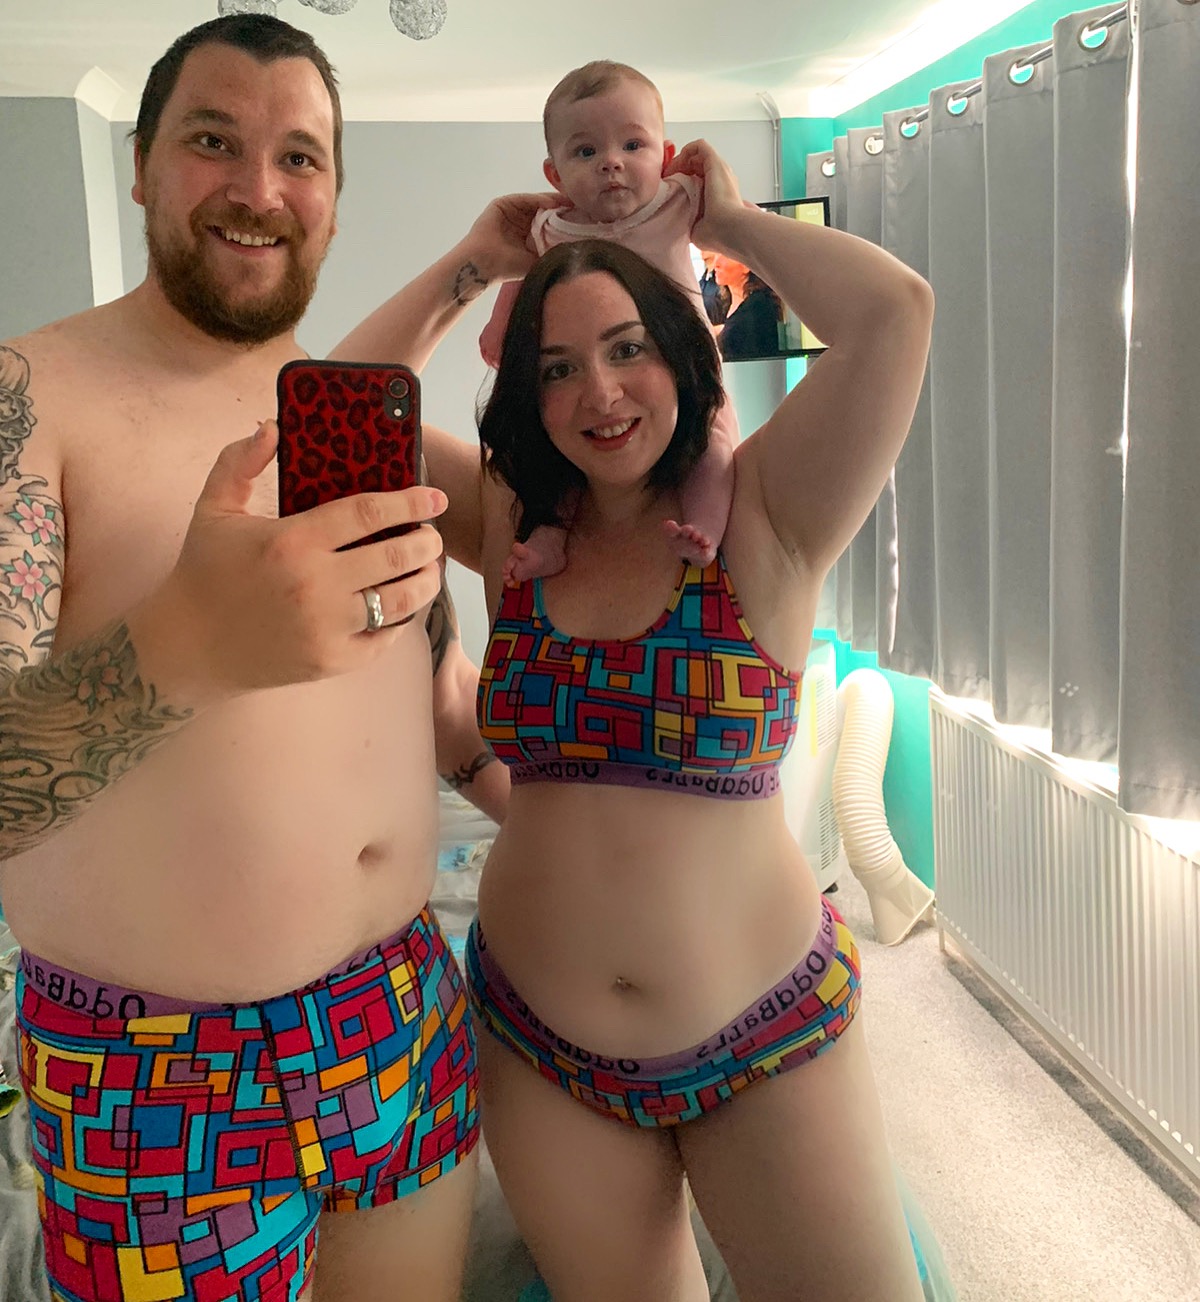 OddBalls on X: The underwear brand for the whole family